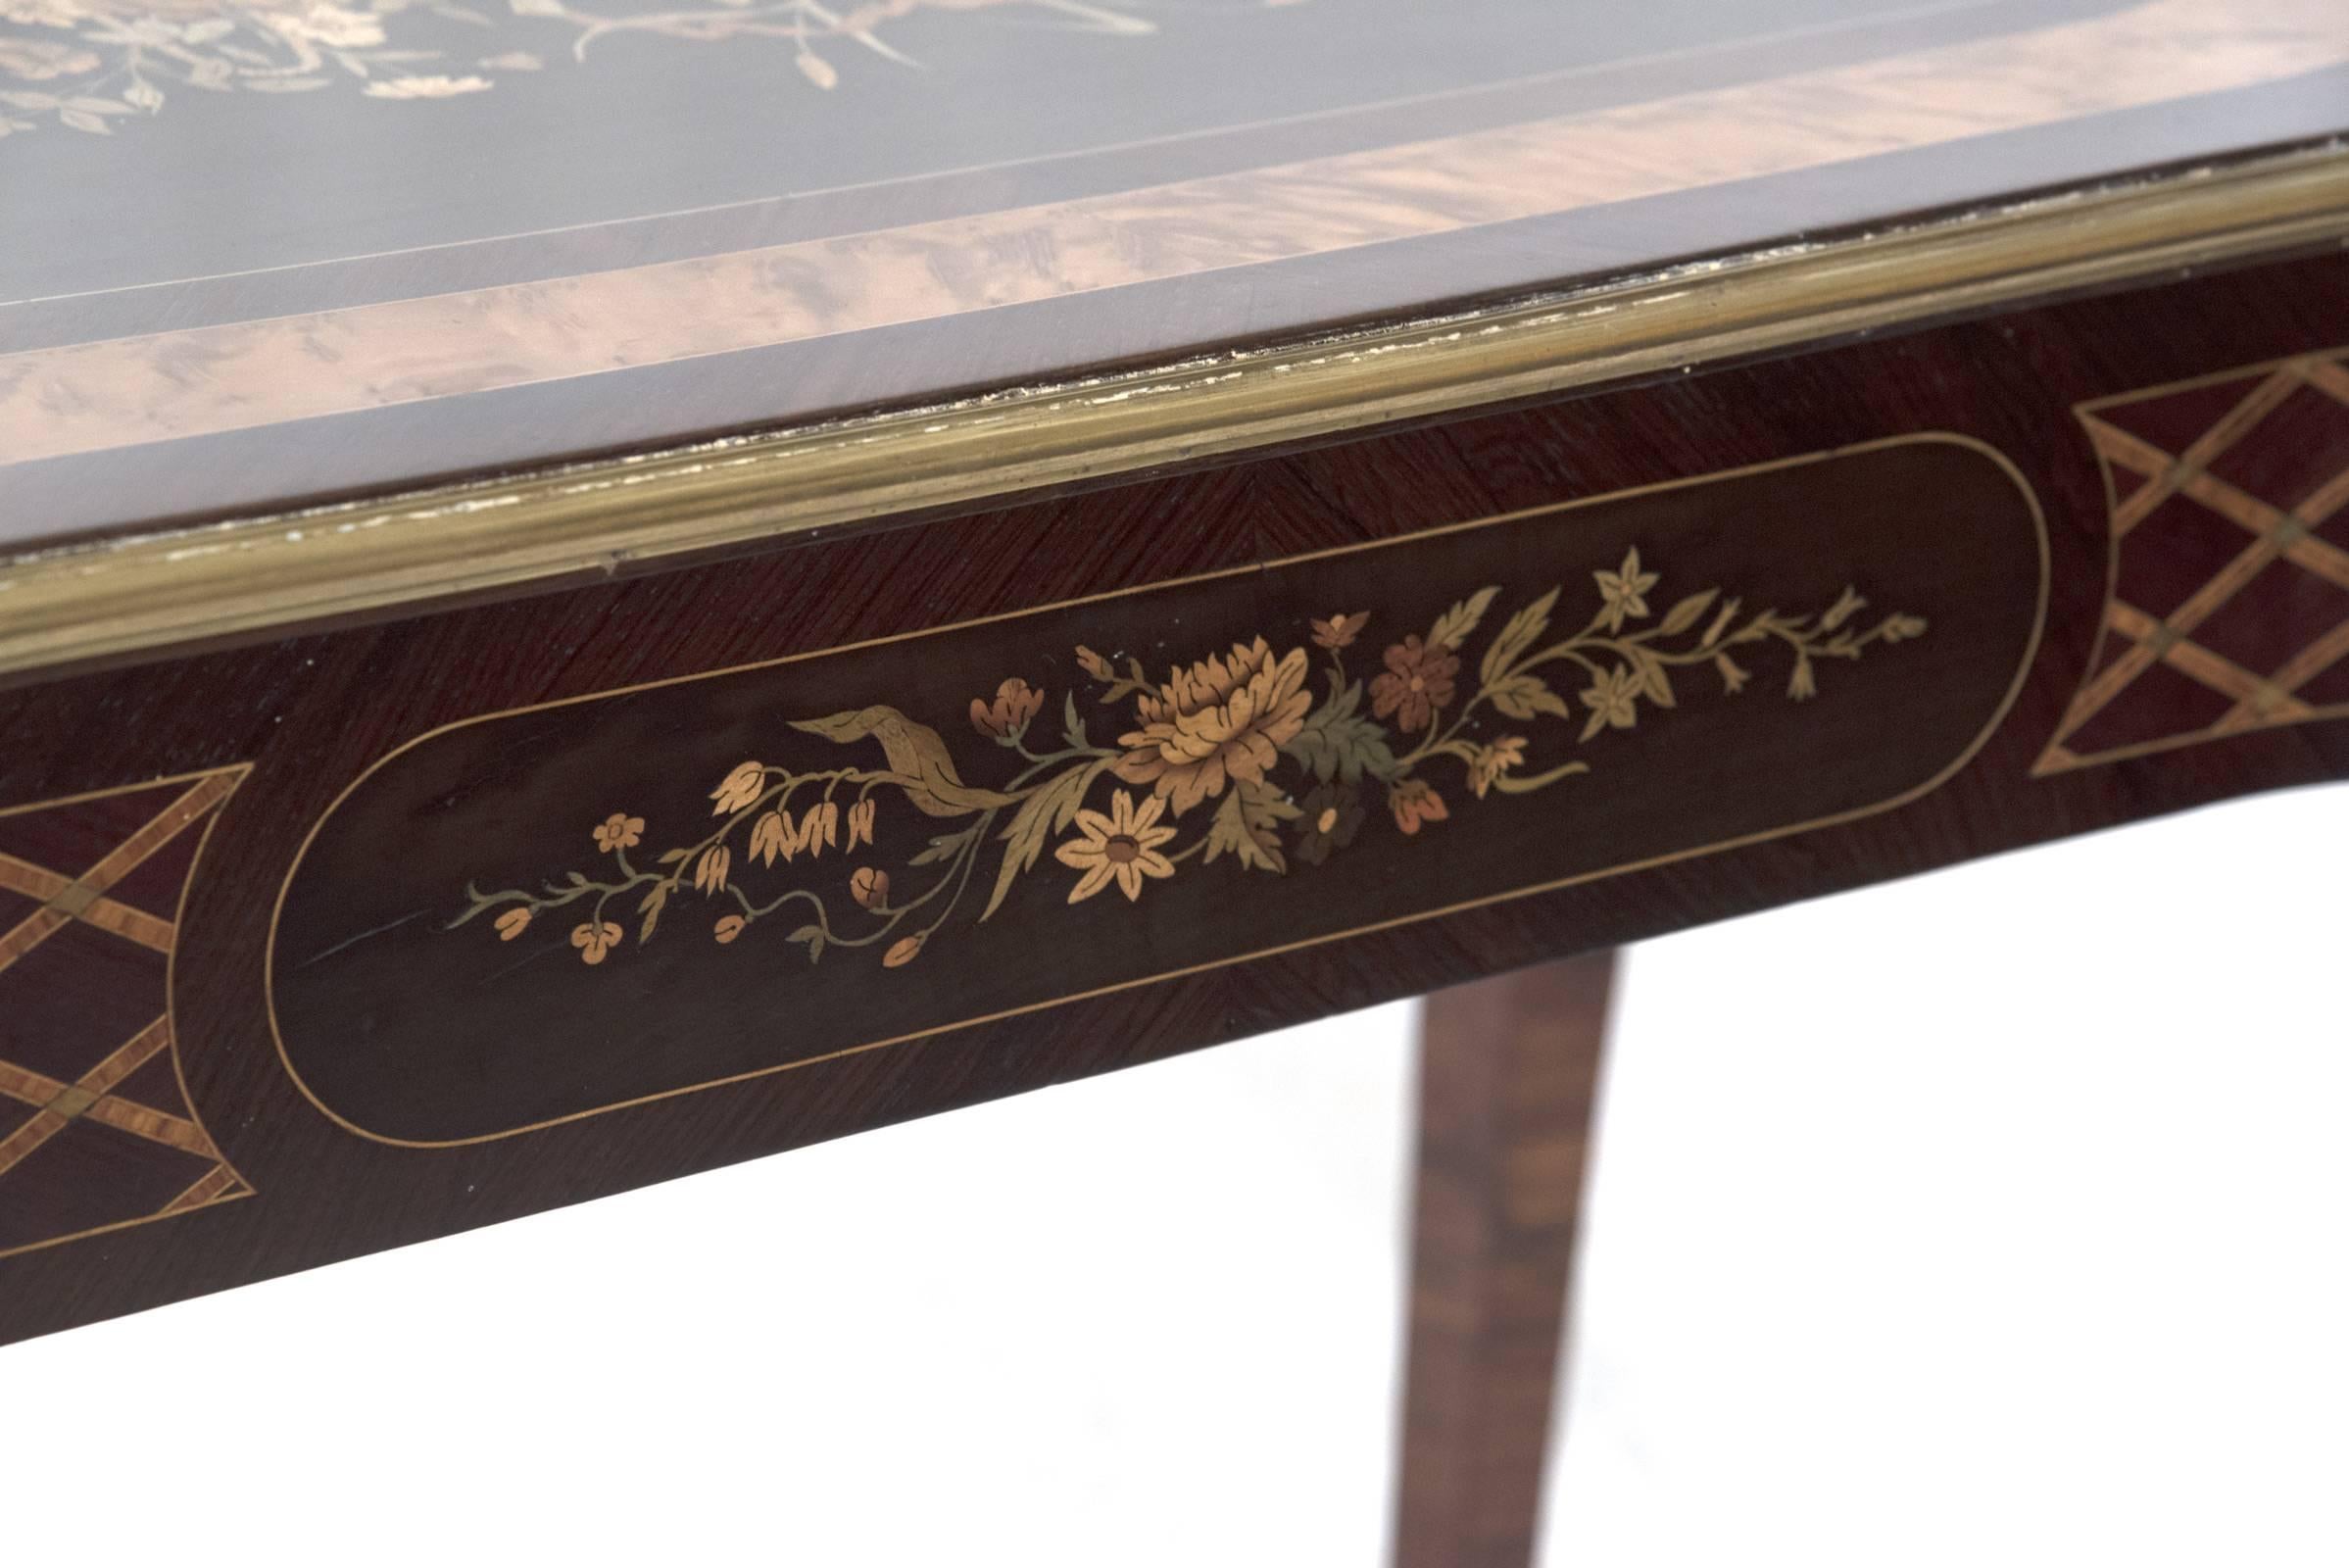 19th Century, French, Louis XV Style Marquetry Bureau Plat with Bronze Mounts For Sale 2